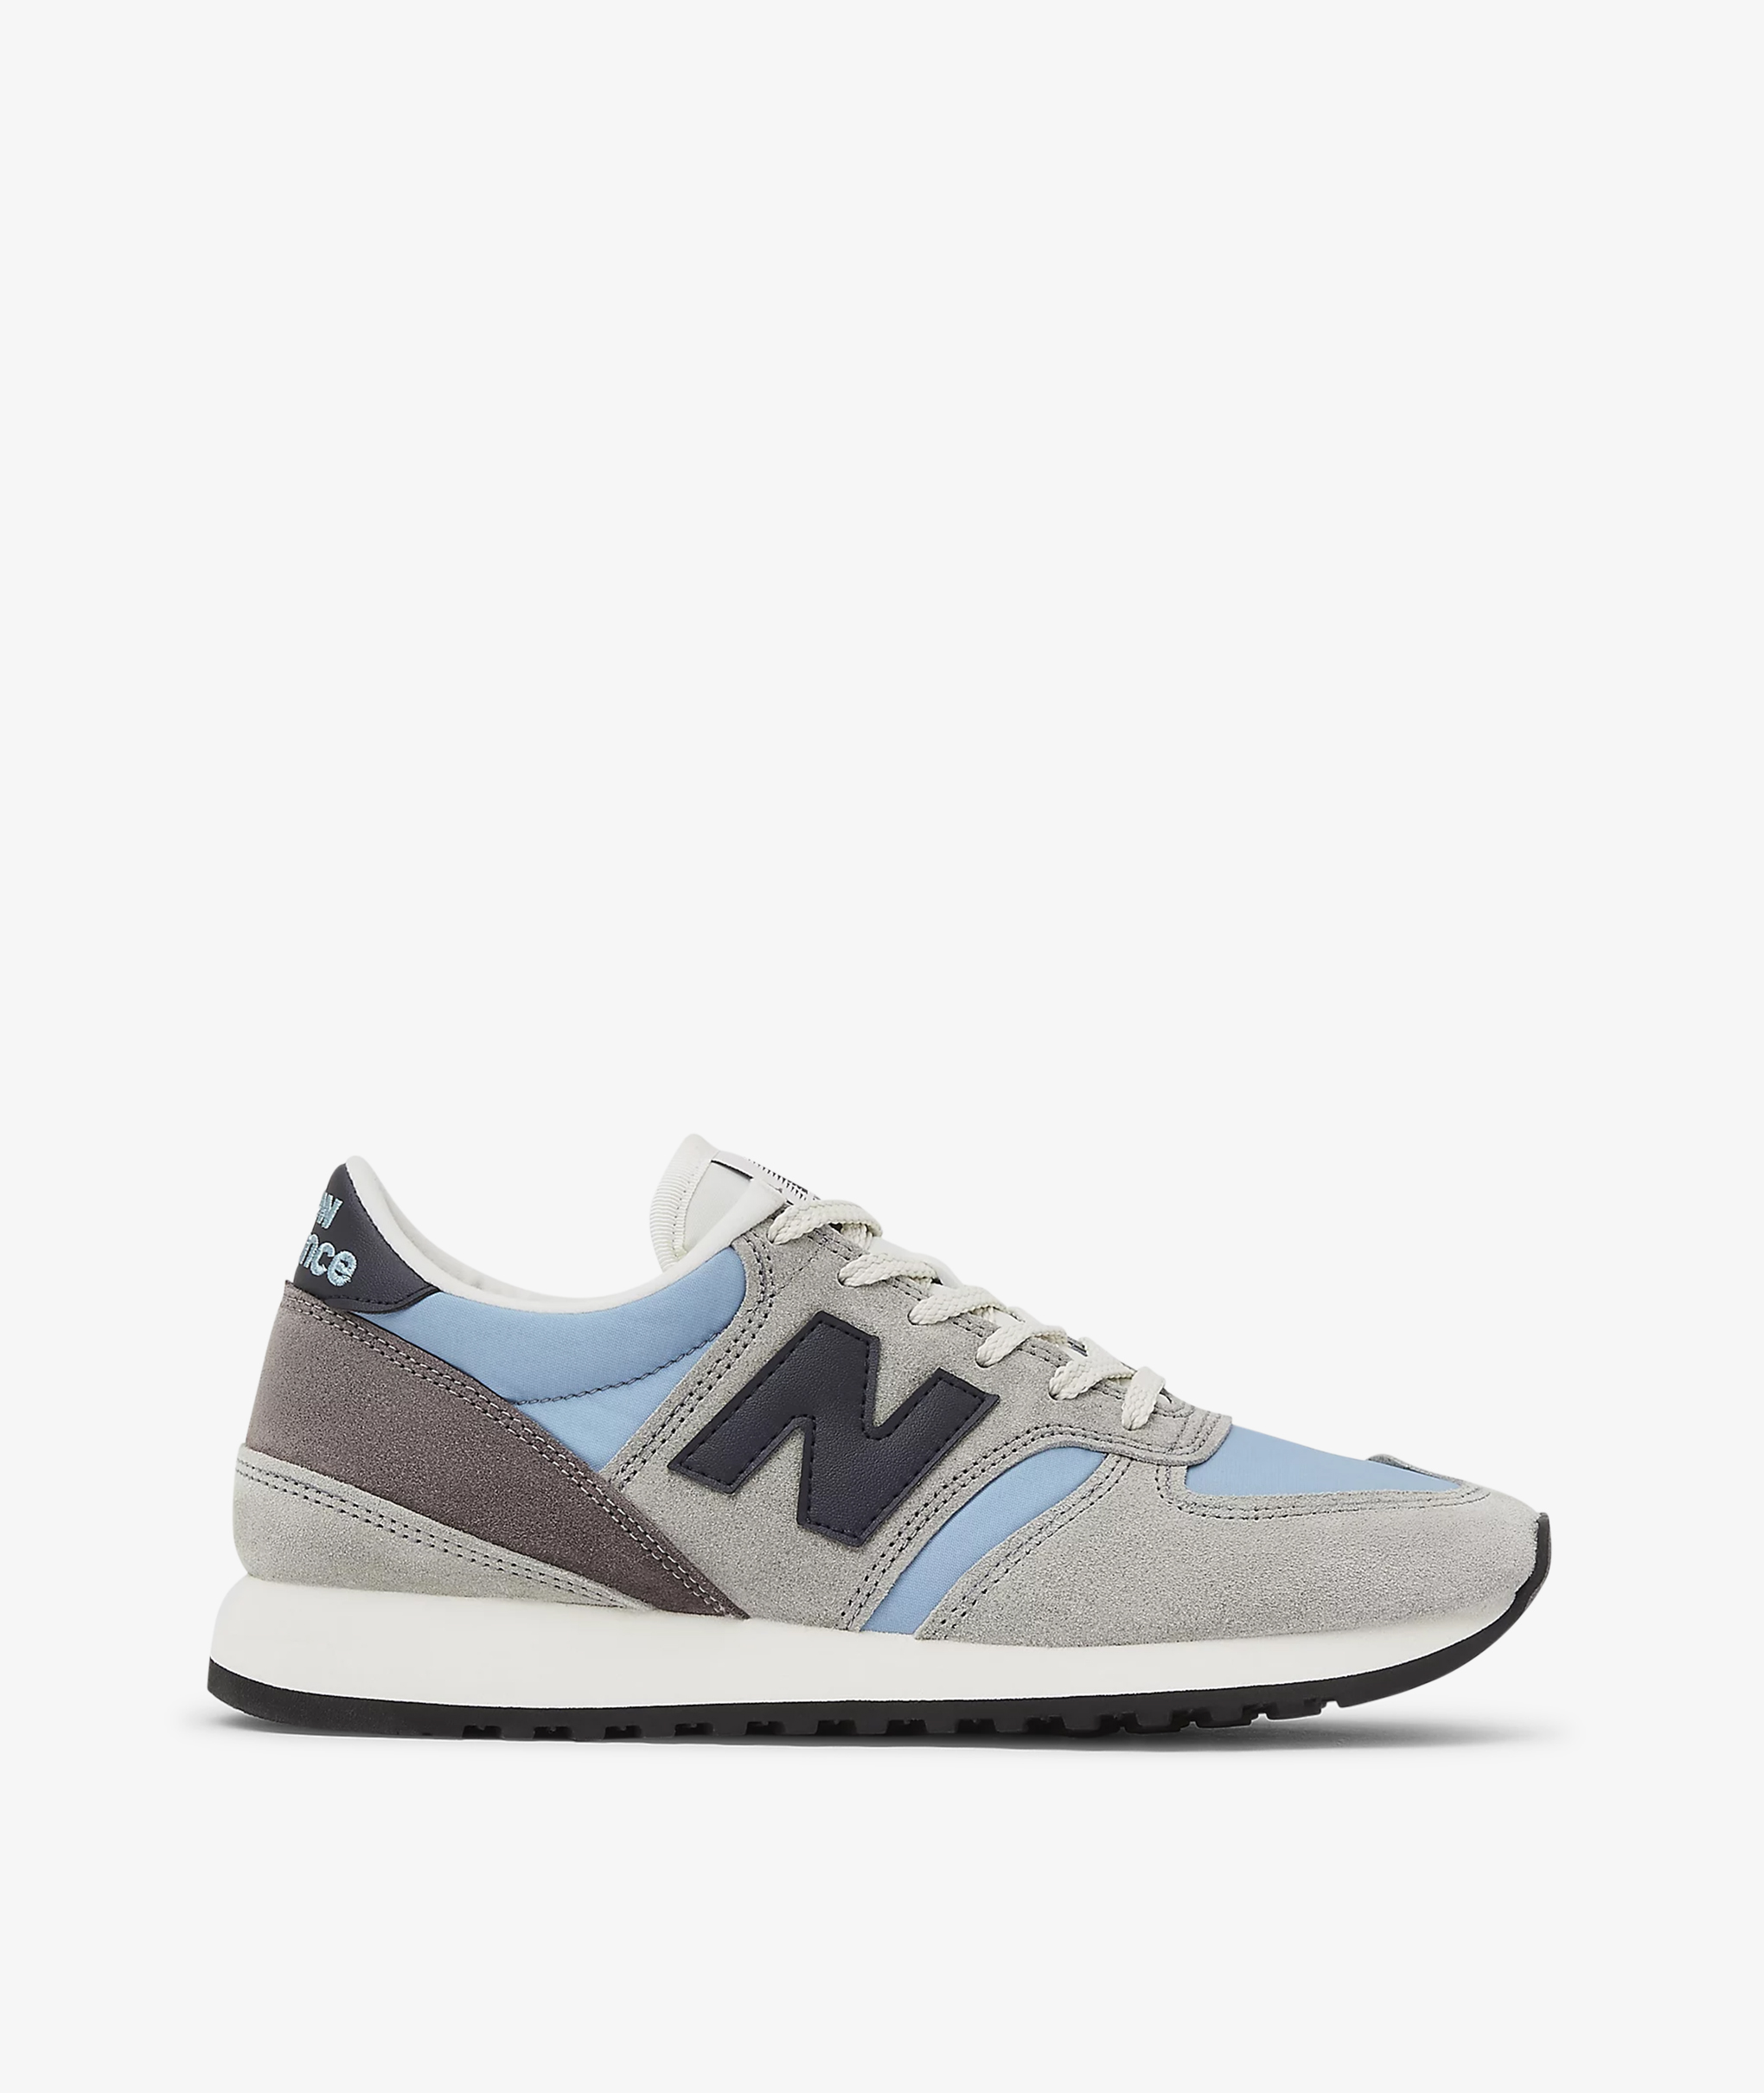 Norse Store | Shipping Worldwide - New Balance M730 - Pussywillow 